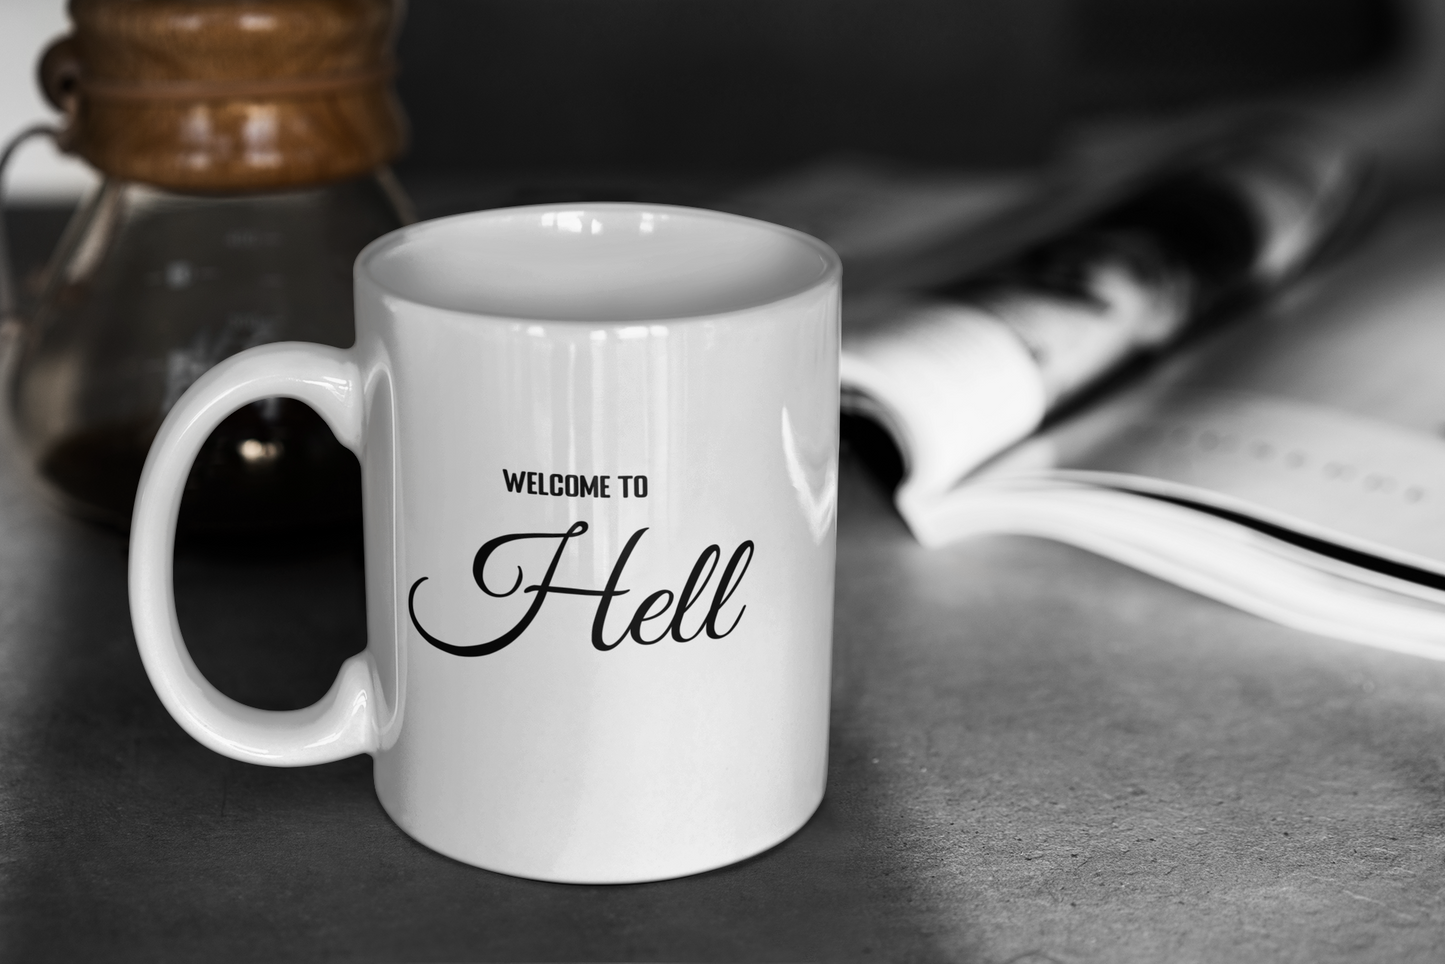 A glossy white 11oz mug with the words 'Welcome to Hell' Printed in the centre in block and cursive font. The mug is placed on a grey table top and a glass coffee pot and grey magazine can be seen in the background slightly blurred.